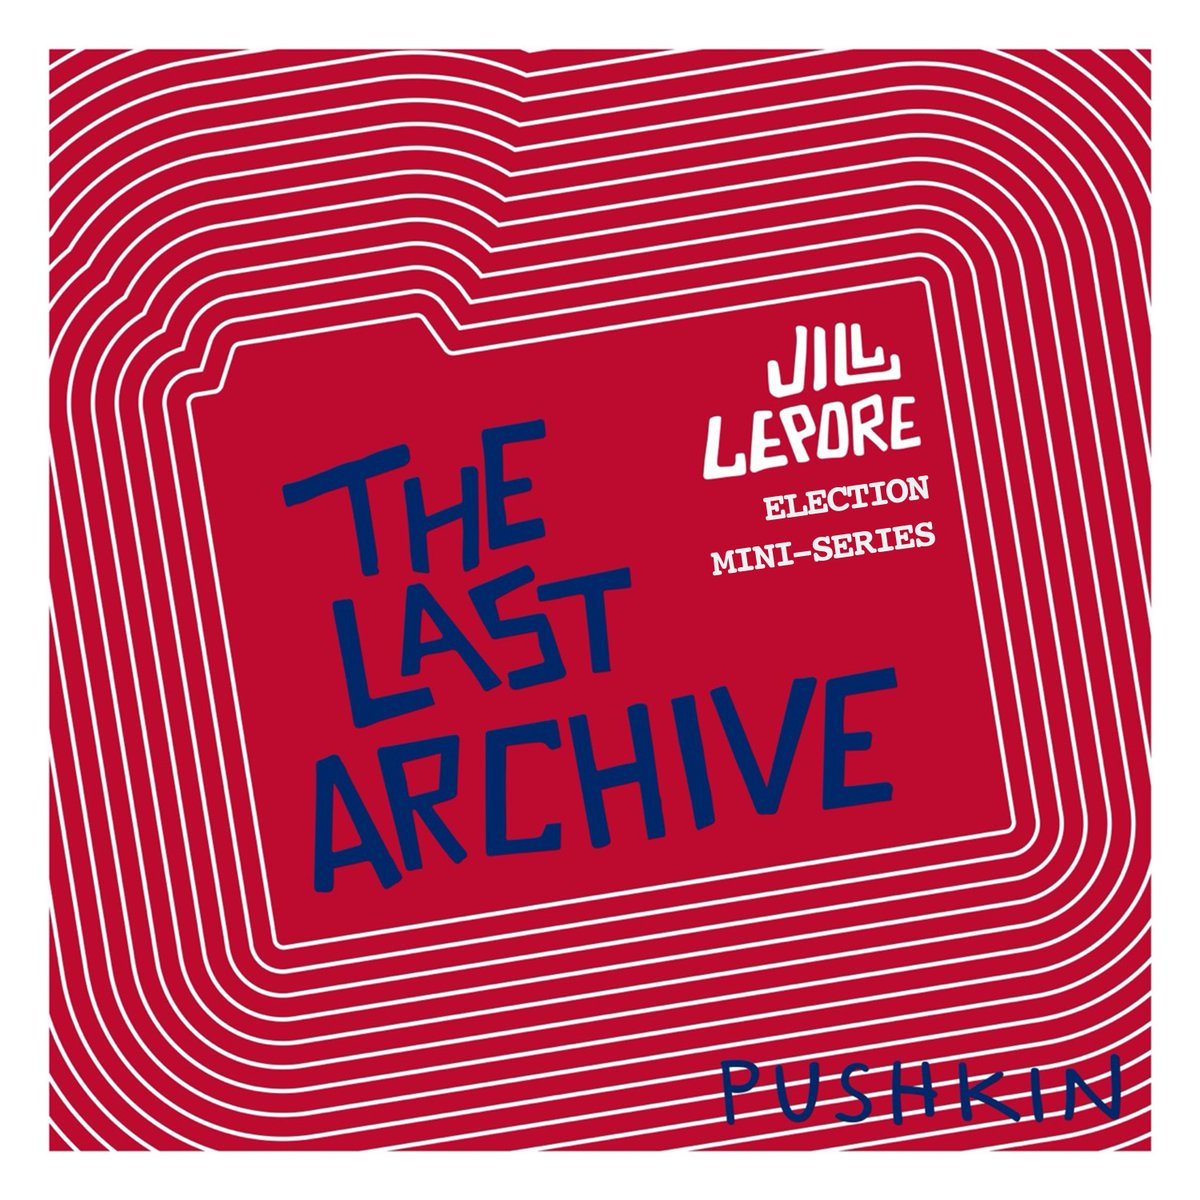 Election Year 2024 is upon us... and it looks like a bit of a mess. In a 4-part mini-series, Jill Lepore & @bhafrey revisit classic #TheLastArchive episodes to contextualize our present moment in the history that brought us here. Audio trailer out now!🇺🇸: apple.co/498EsZx